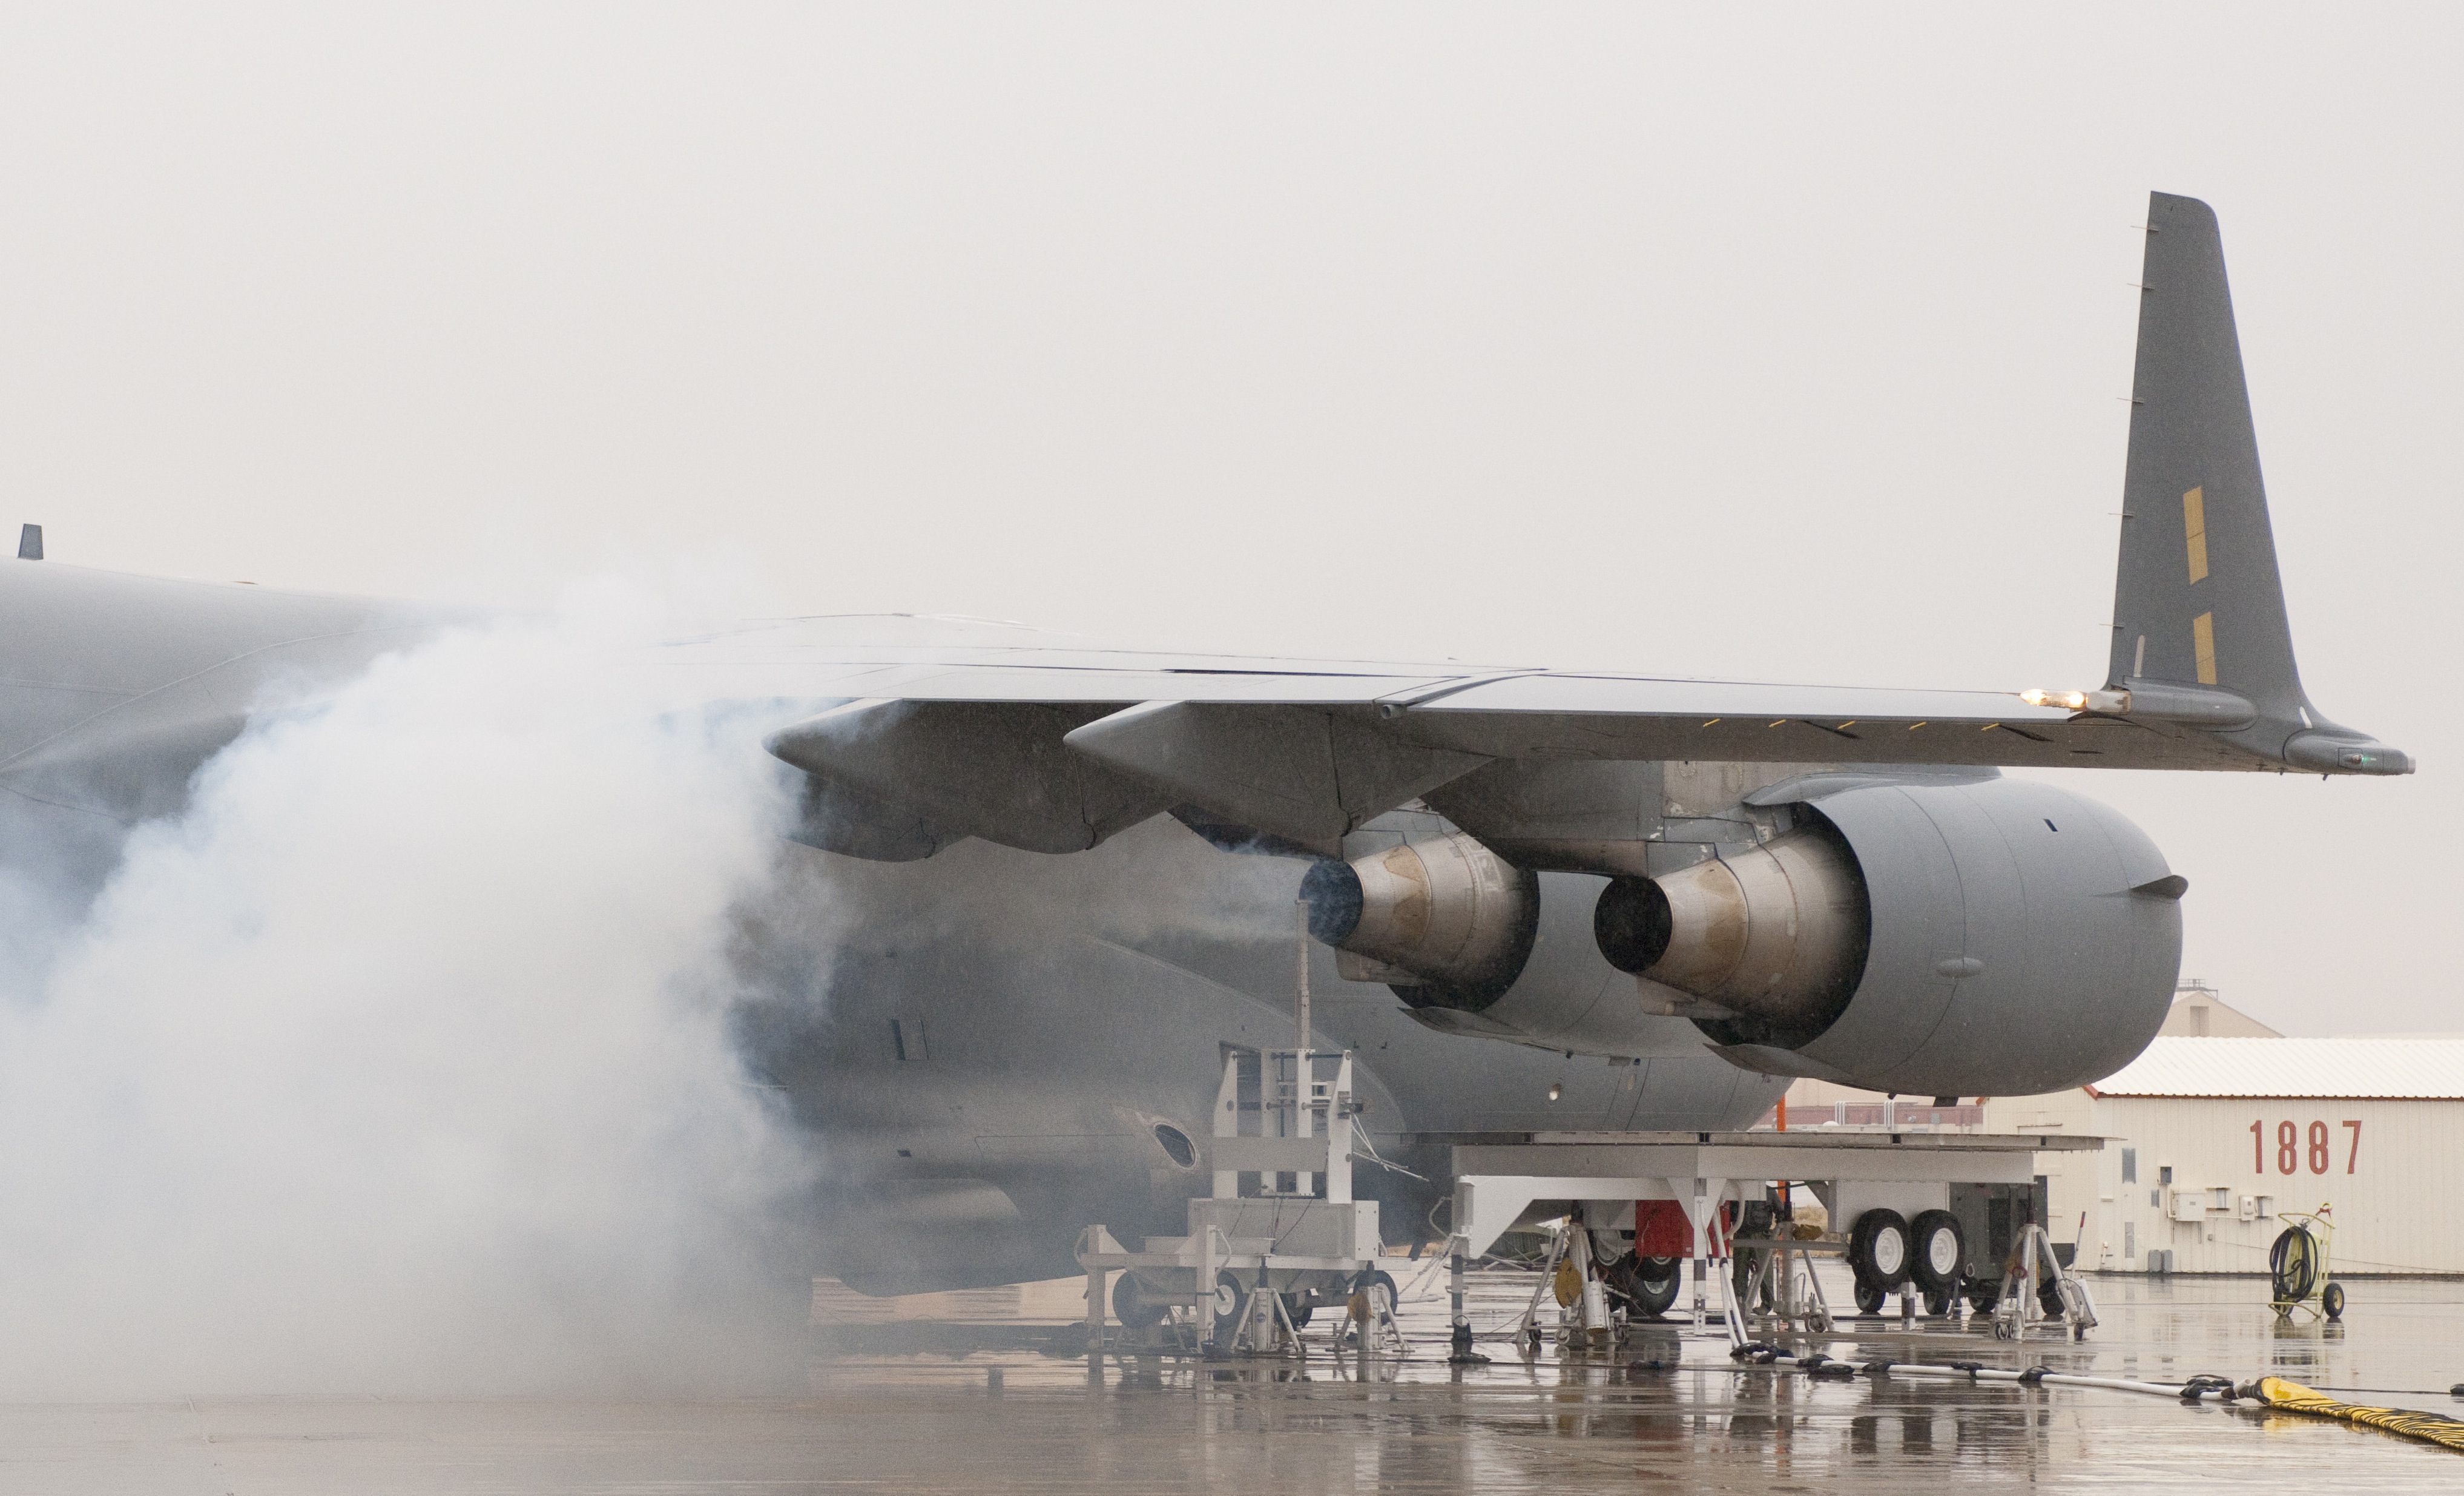 Oil smoke billows from the right inboard engine of the C-17 during engine health monitoring tests.